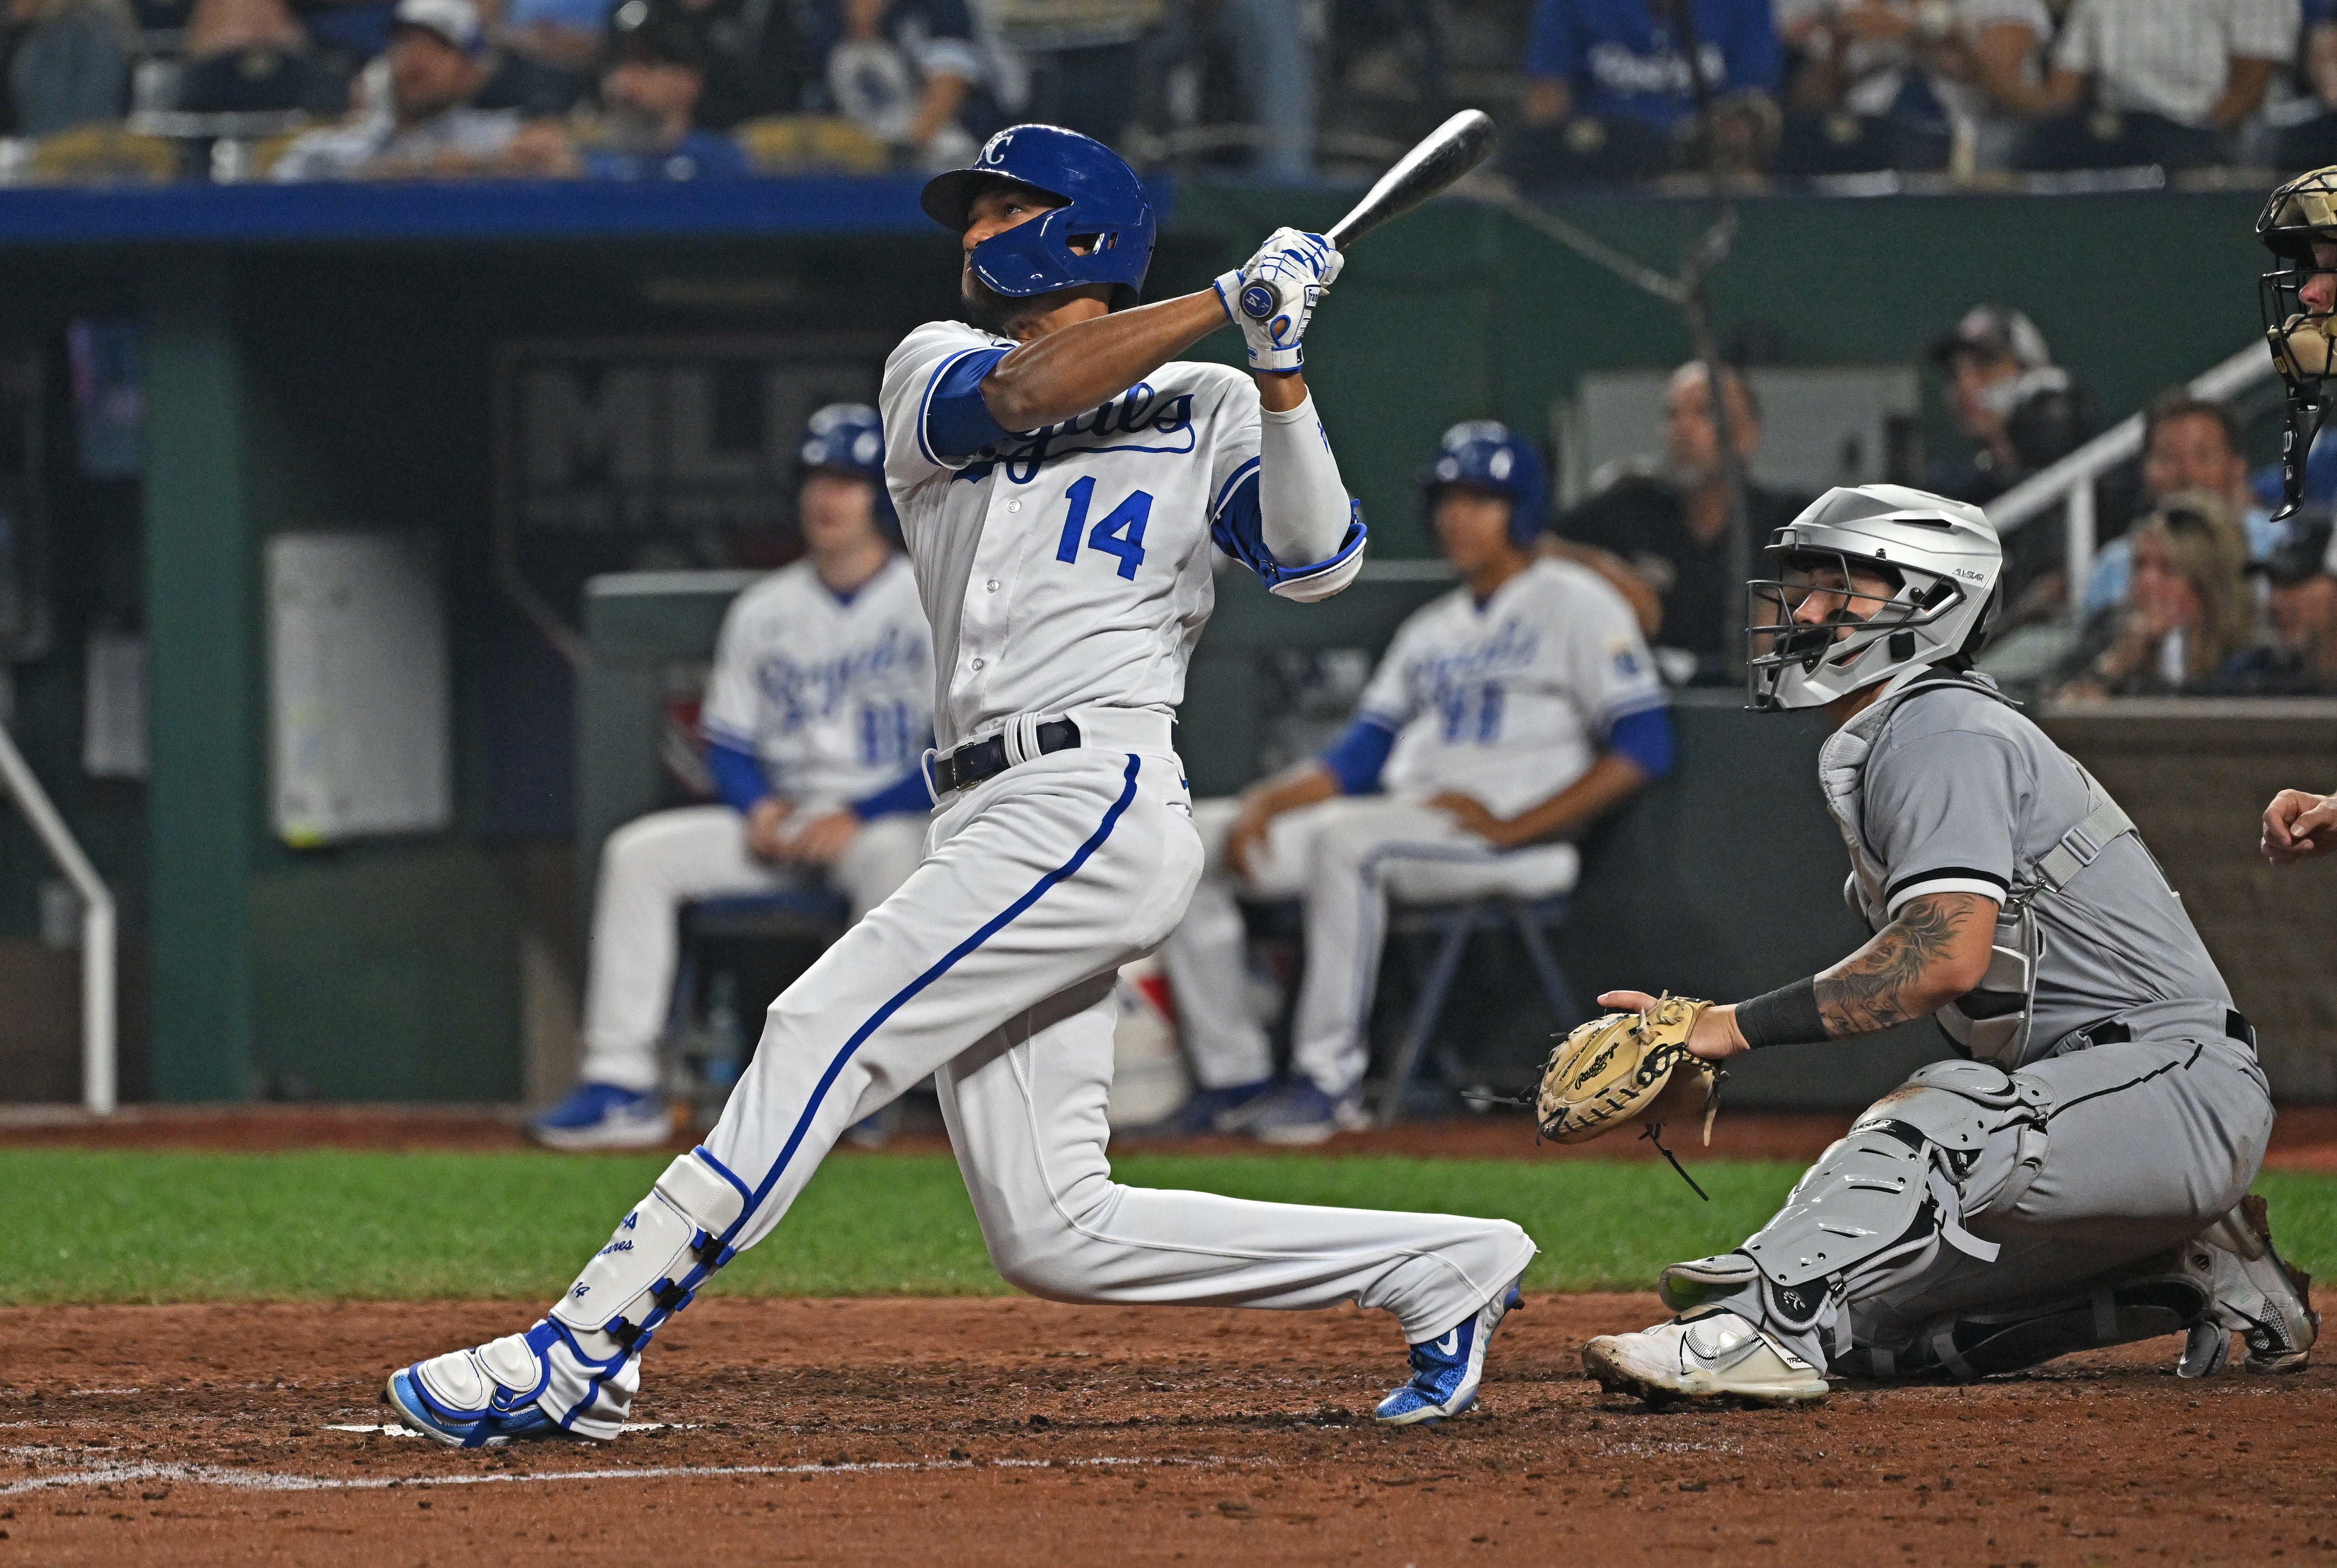 Vaughn homers as White Sox stop slide by topping Royals 7-3 - ABC7